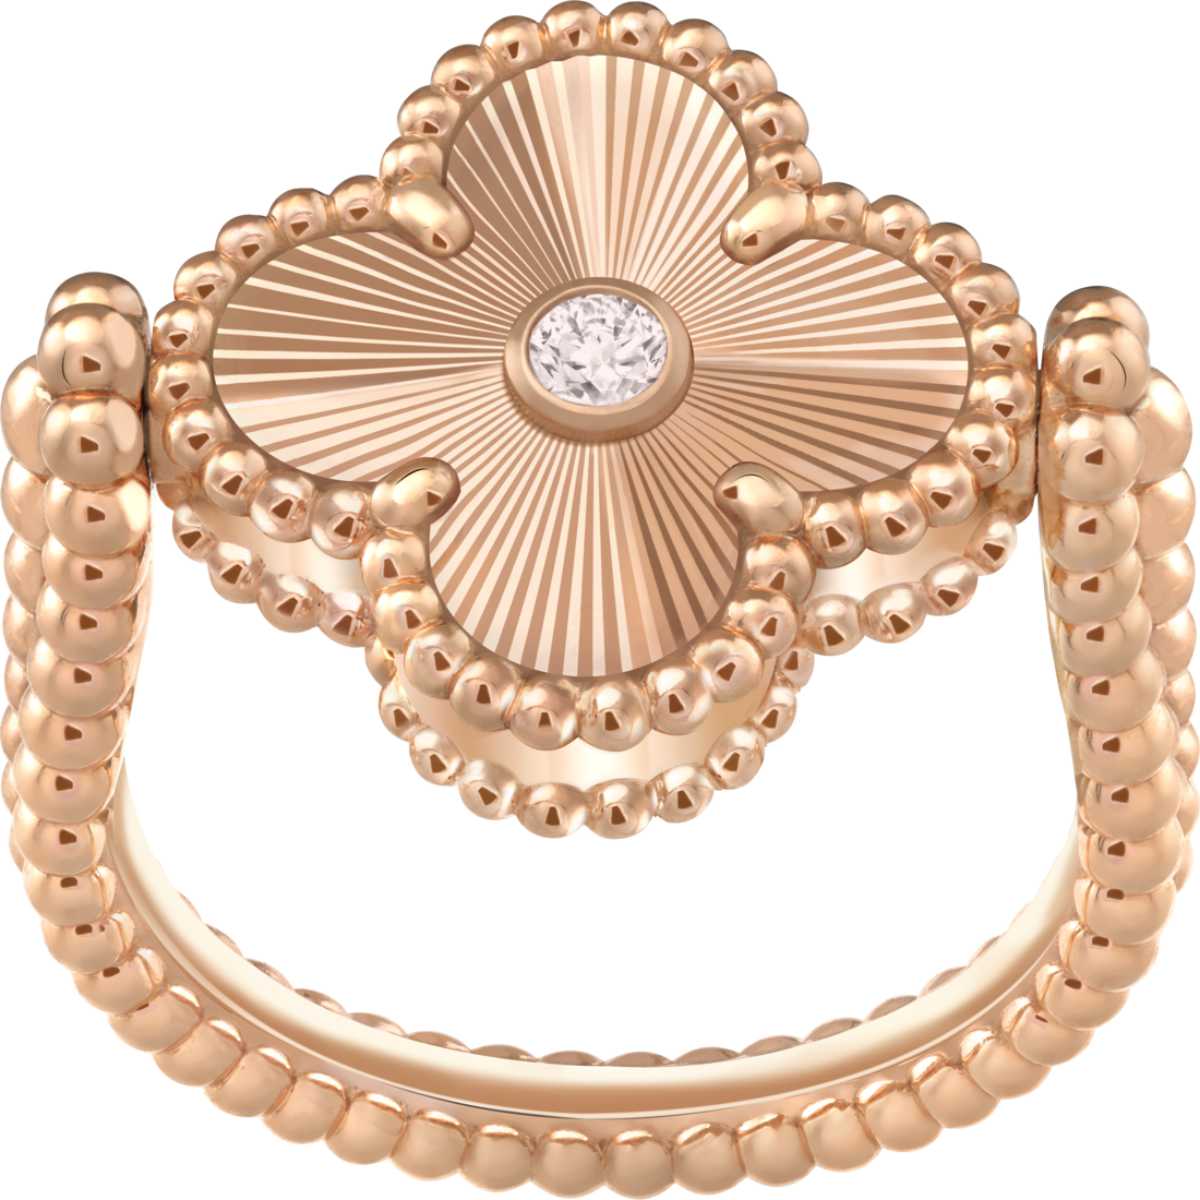 Van Cleef & Arpels Introduces Four New Alhambra Creations